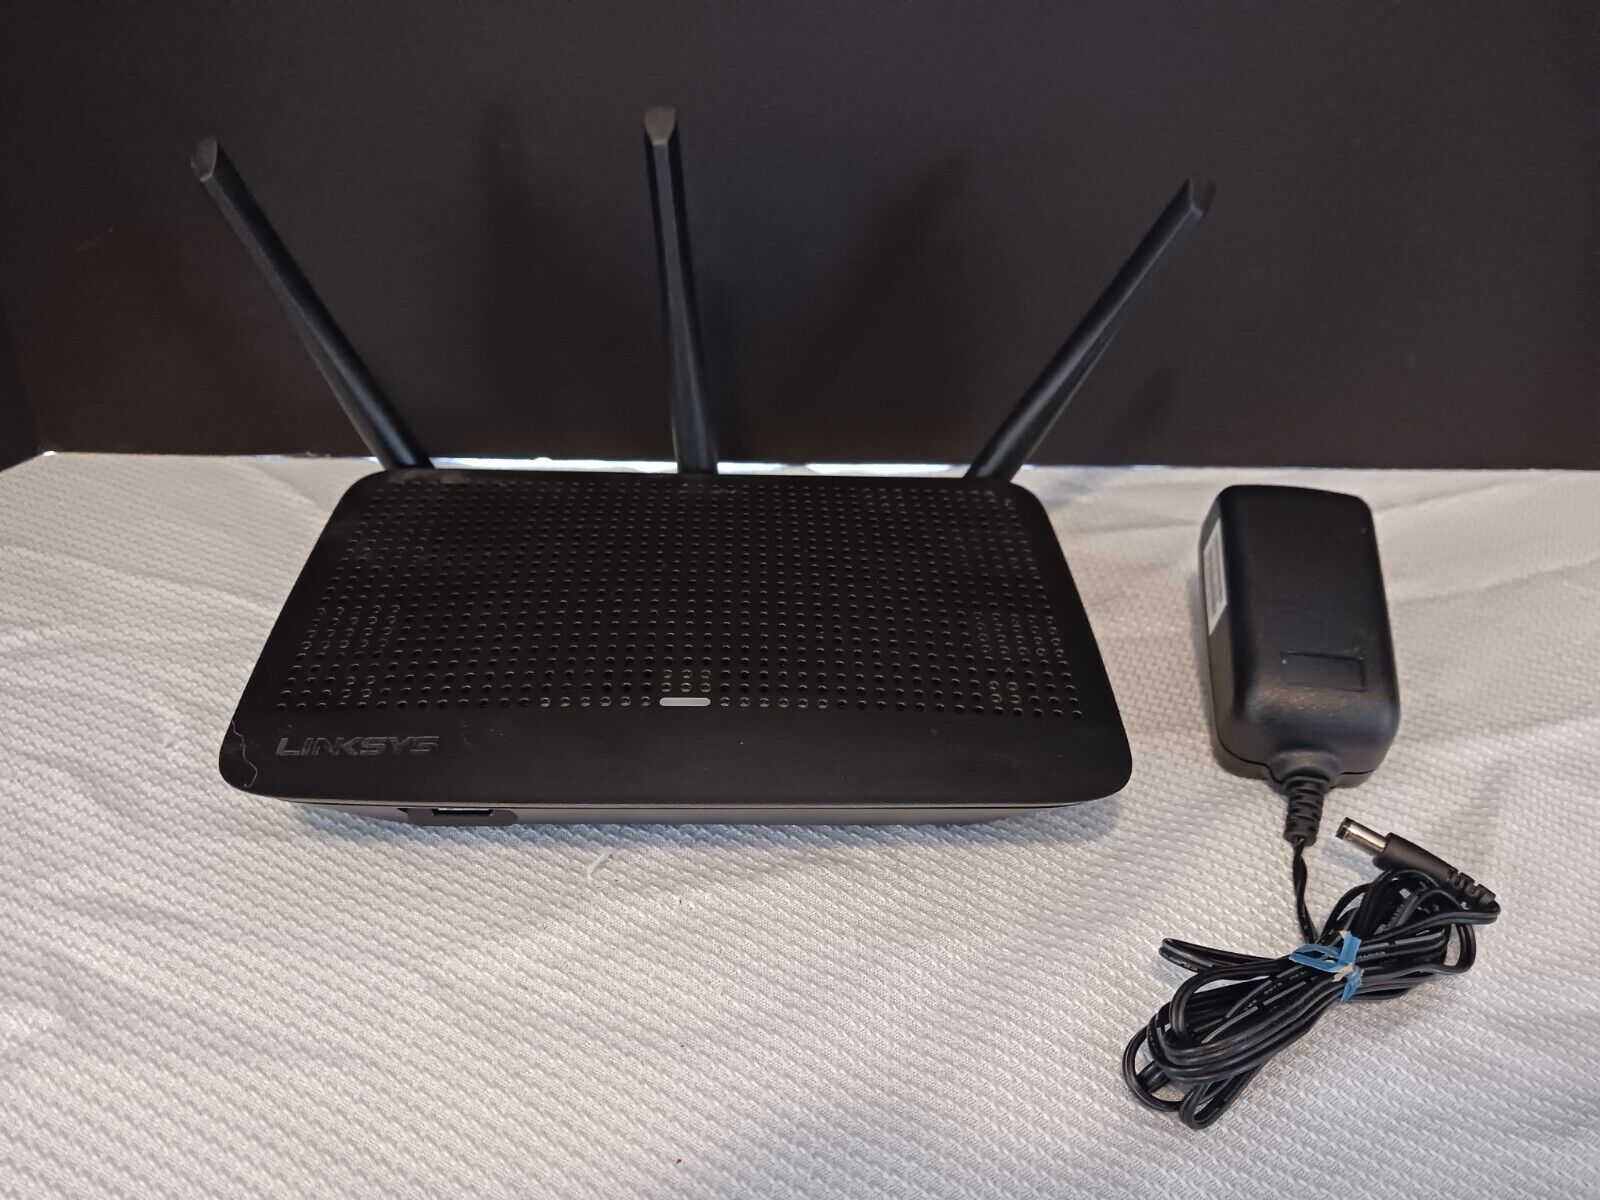 Linksys MAX-STREAM EA7250 AC1750 Dual-Band 1.7 Gbps WiFi 5 Router Tested Working